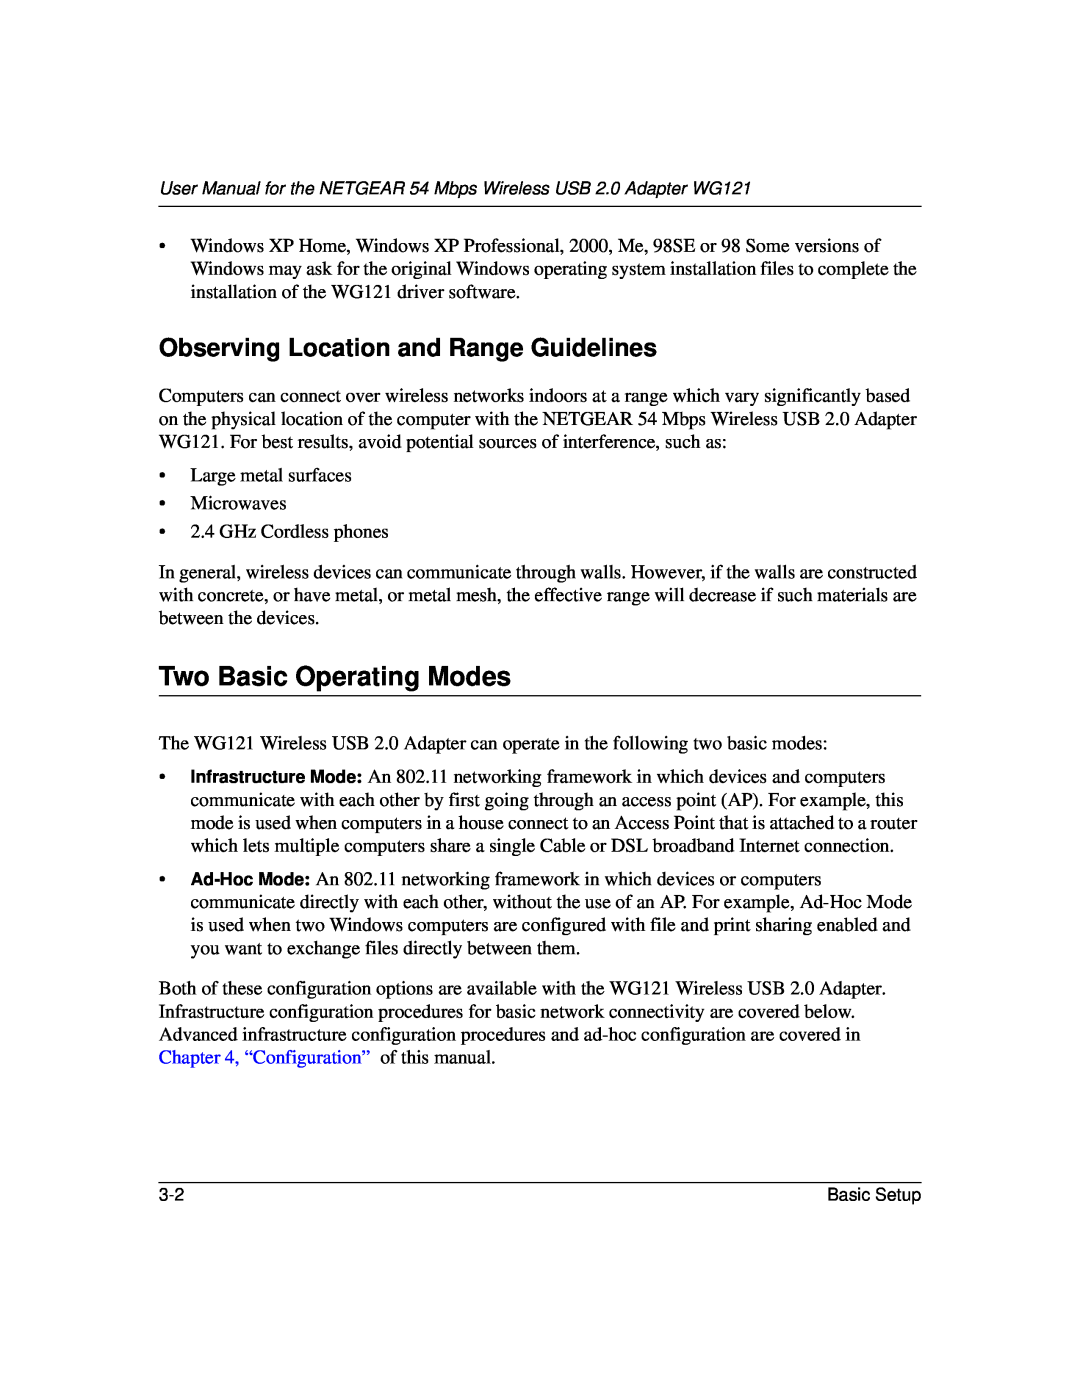 NETGEAR WG121 user manual Two Basic Operating Modes, Observing Location and Range Guidelines 